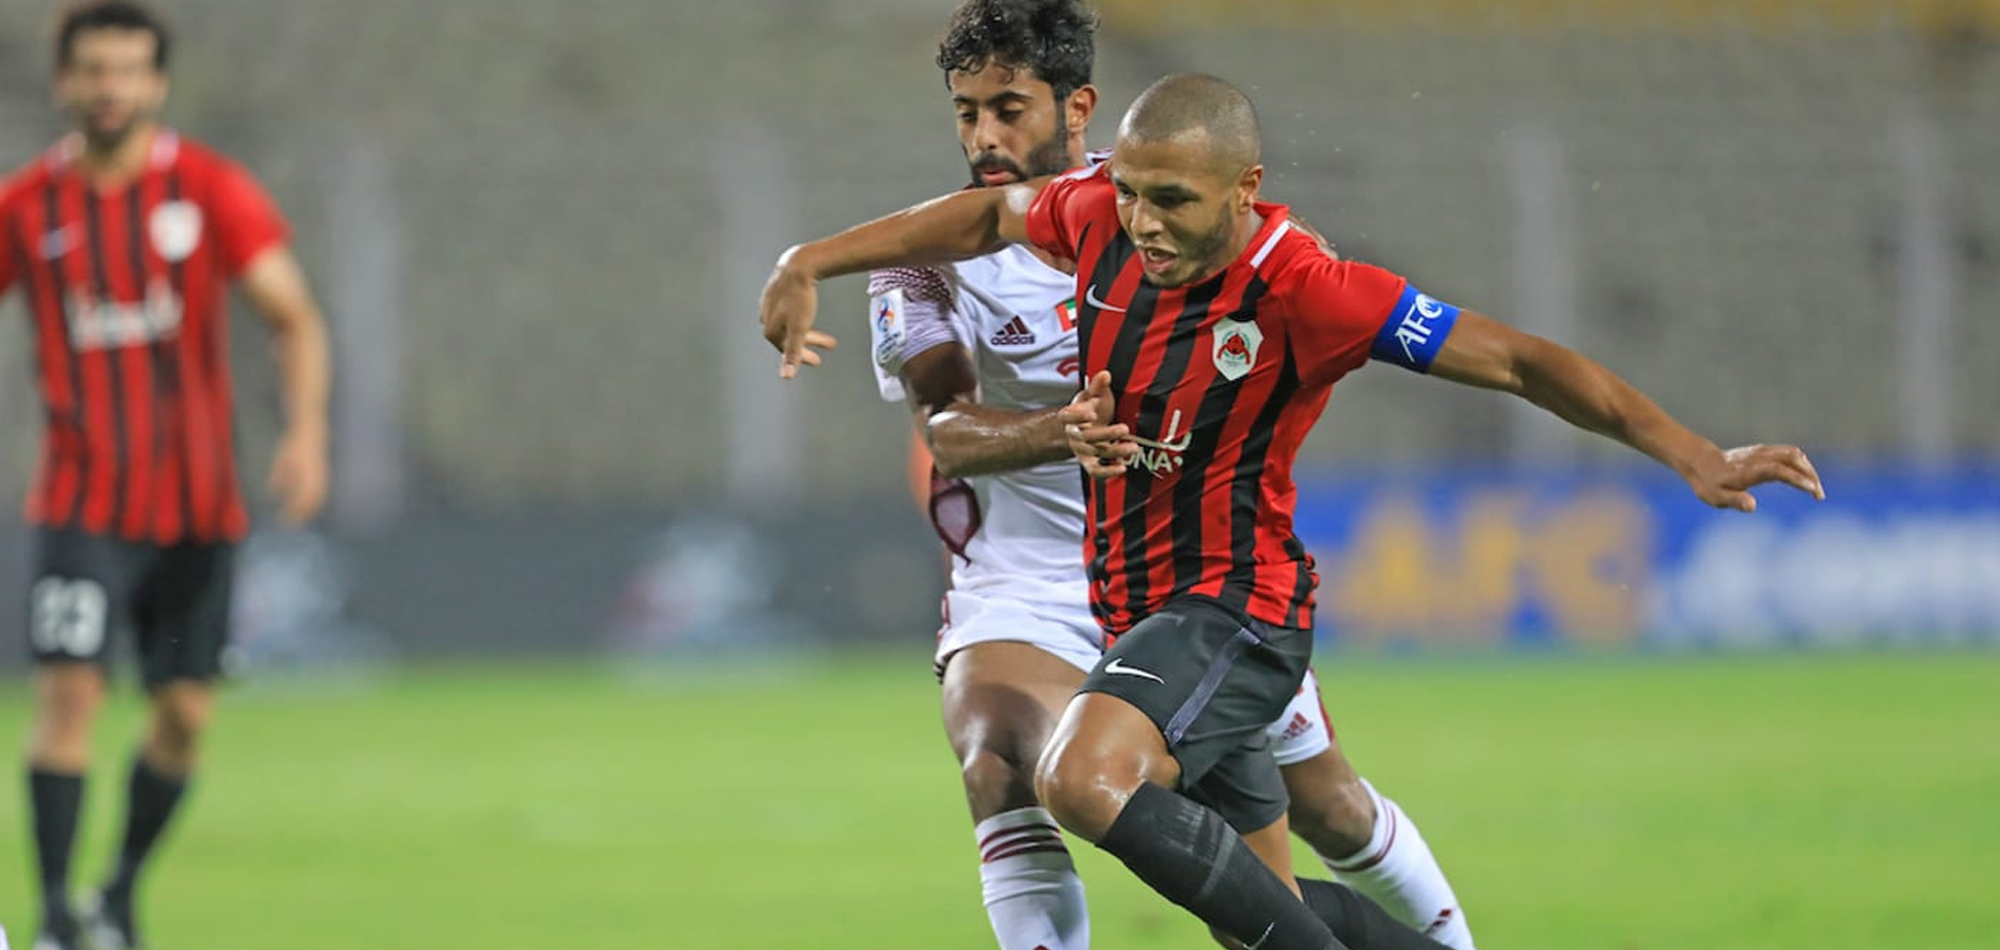 Group E: Al Wahda fight back to defeat Al Rayyan in AFC Champions League classic